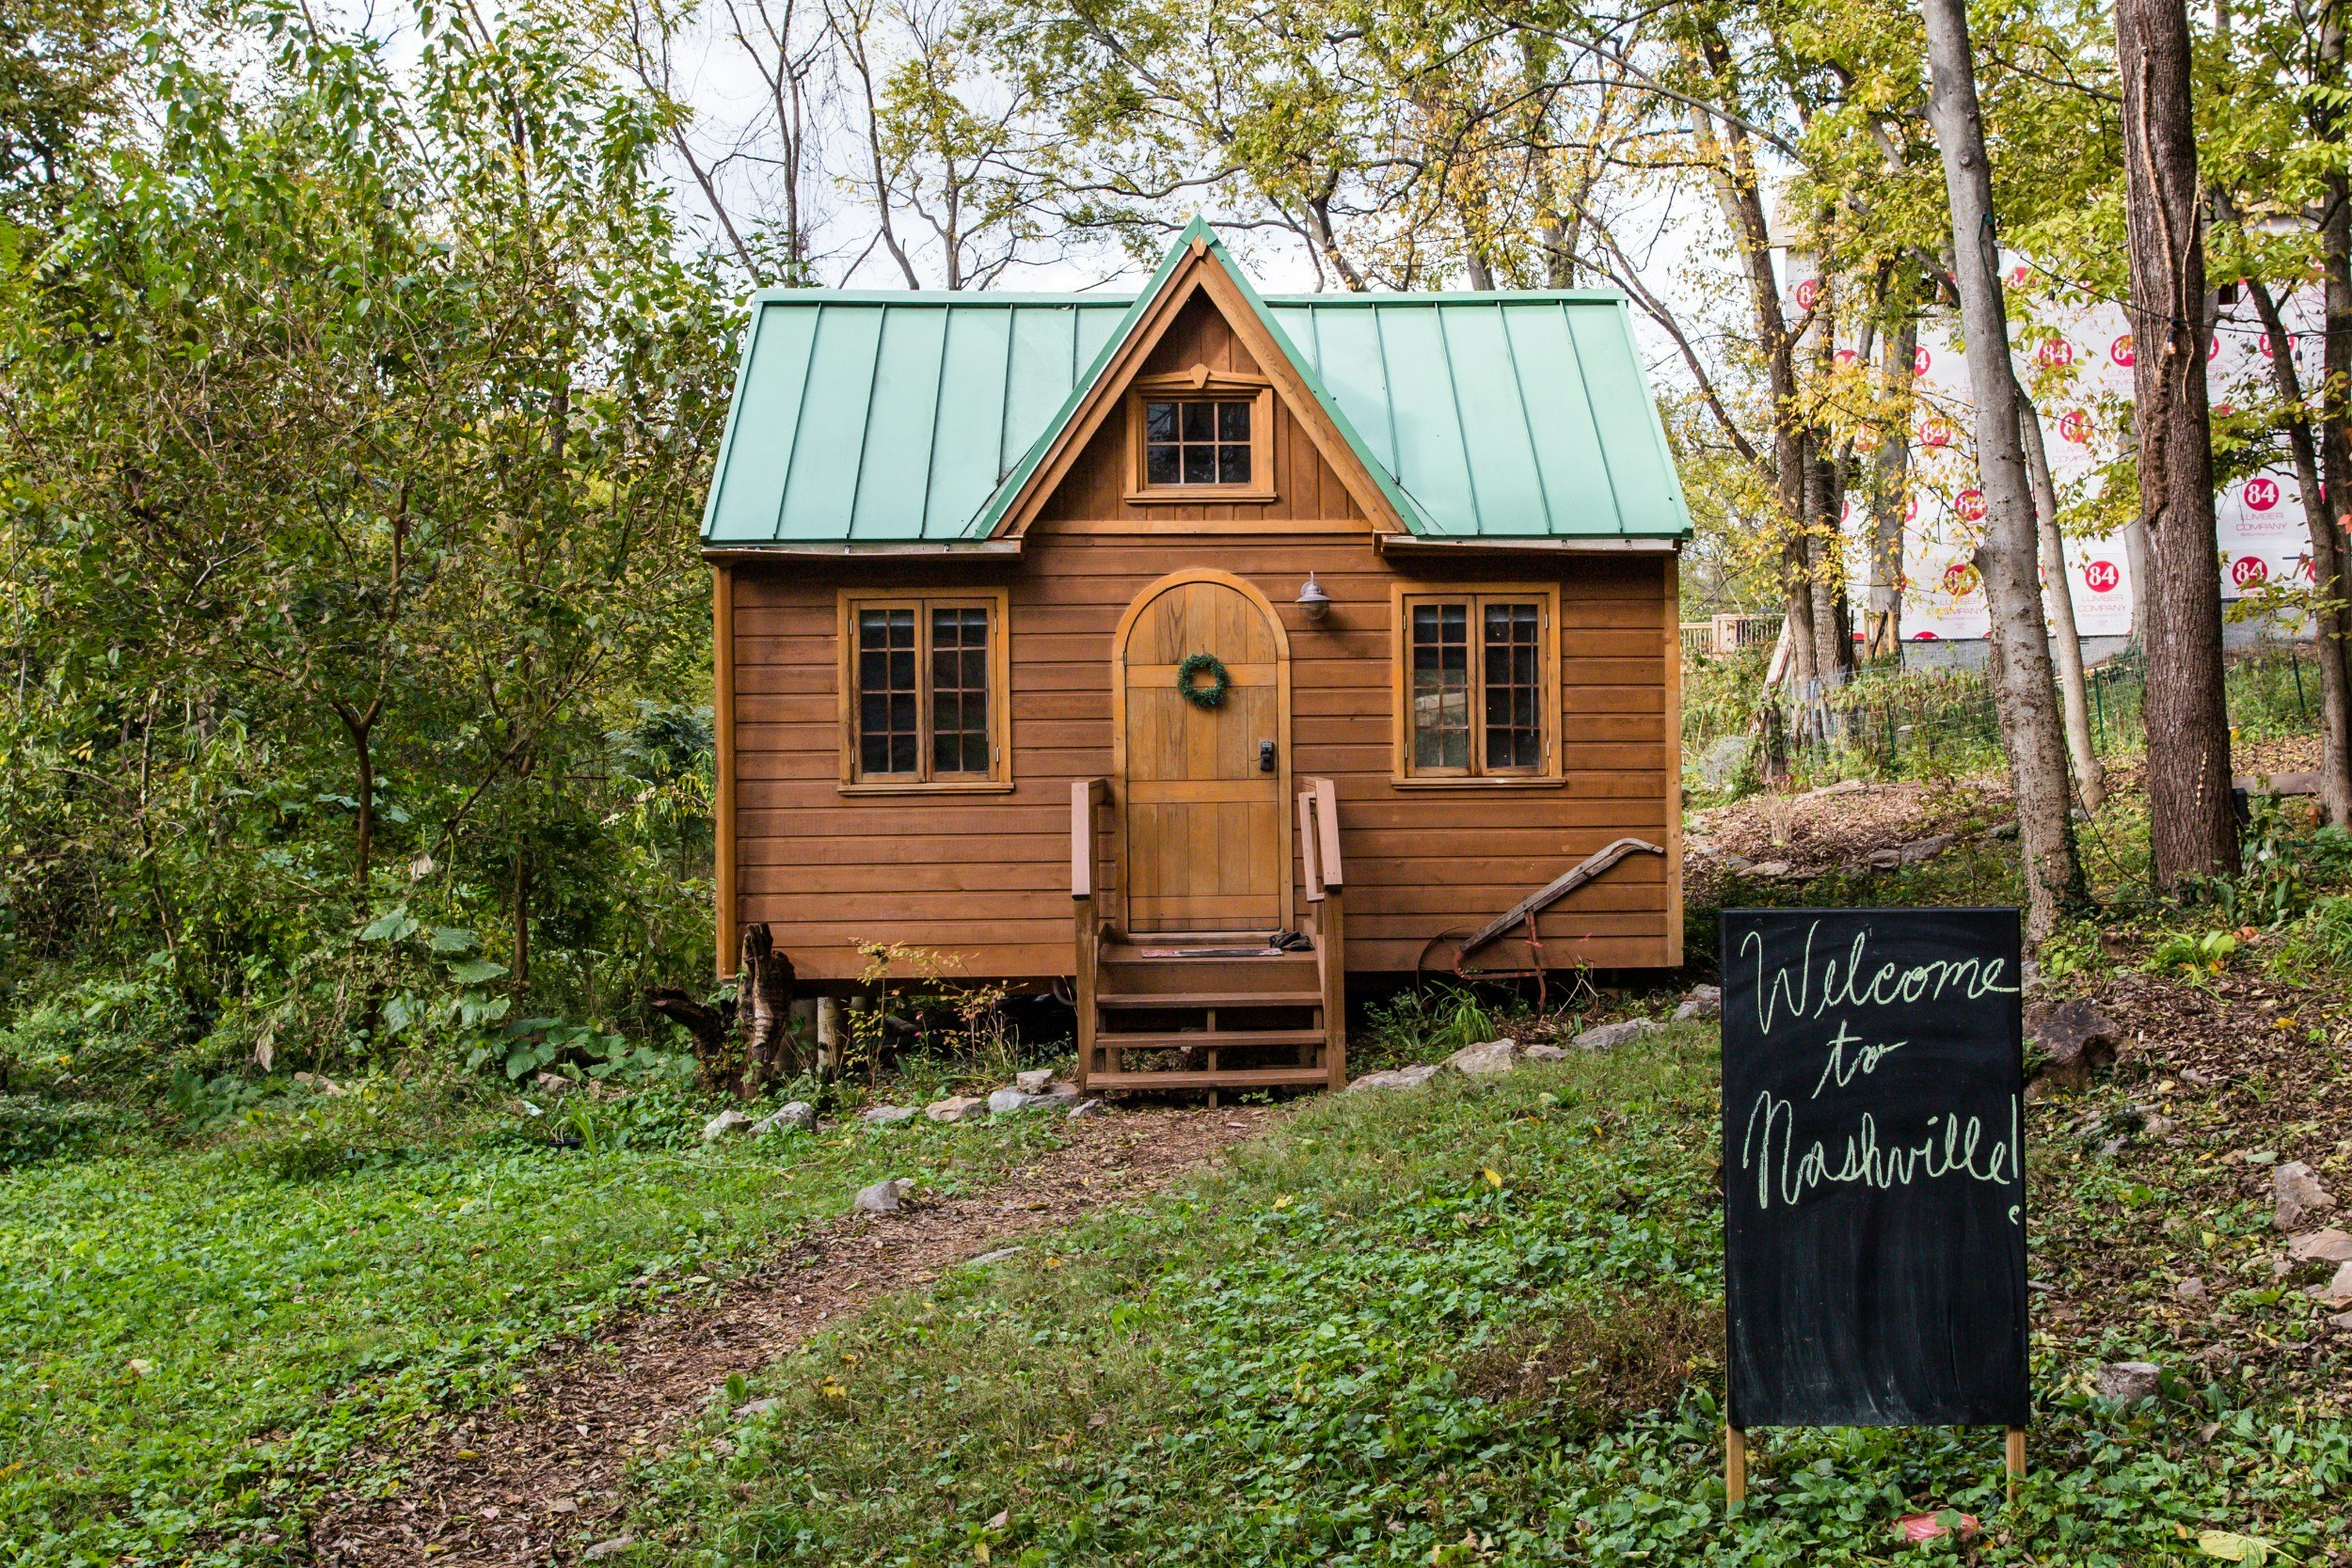 A tiny wooden house in Nashville Tennessee